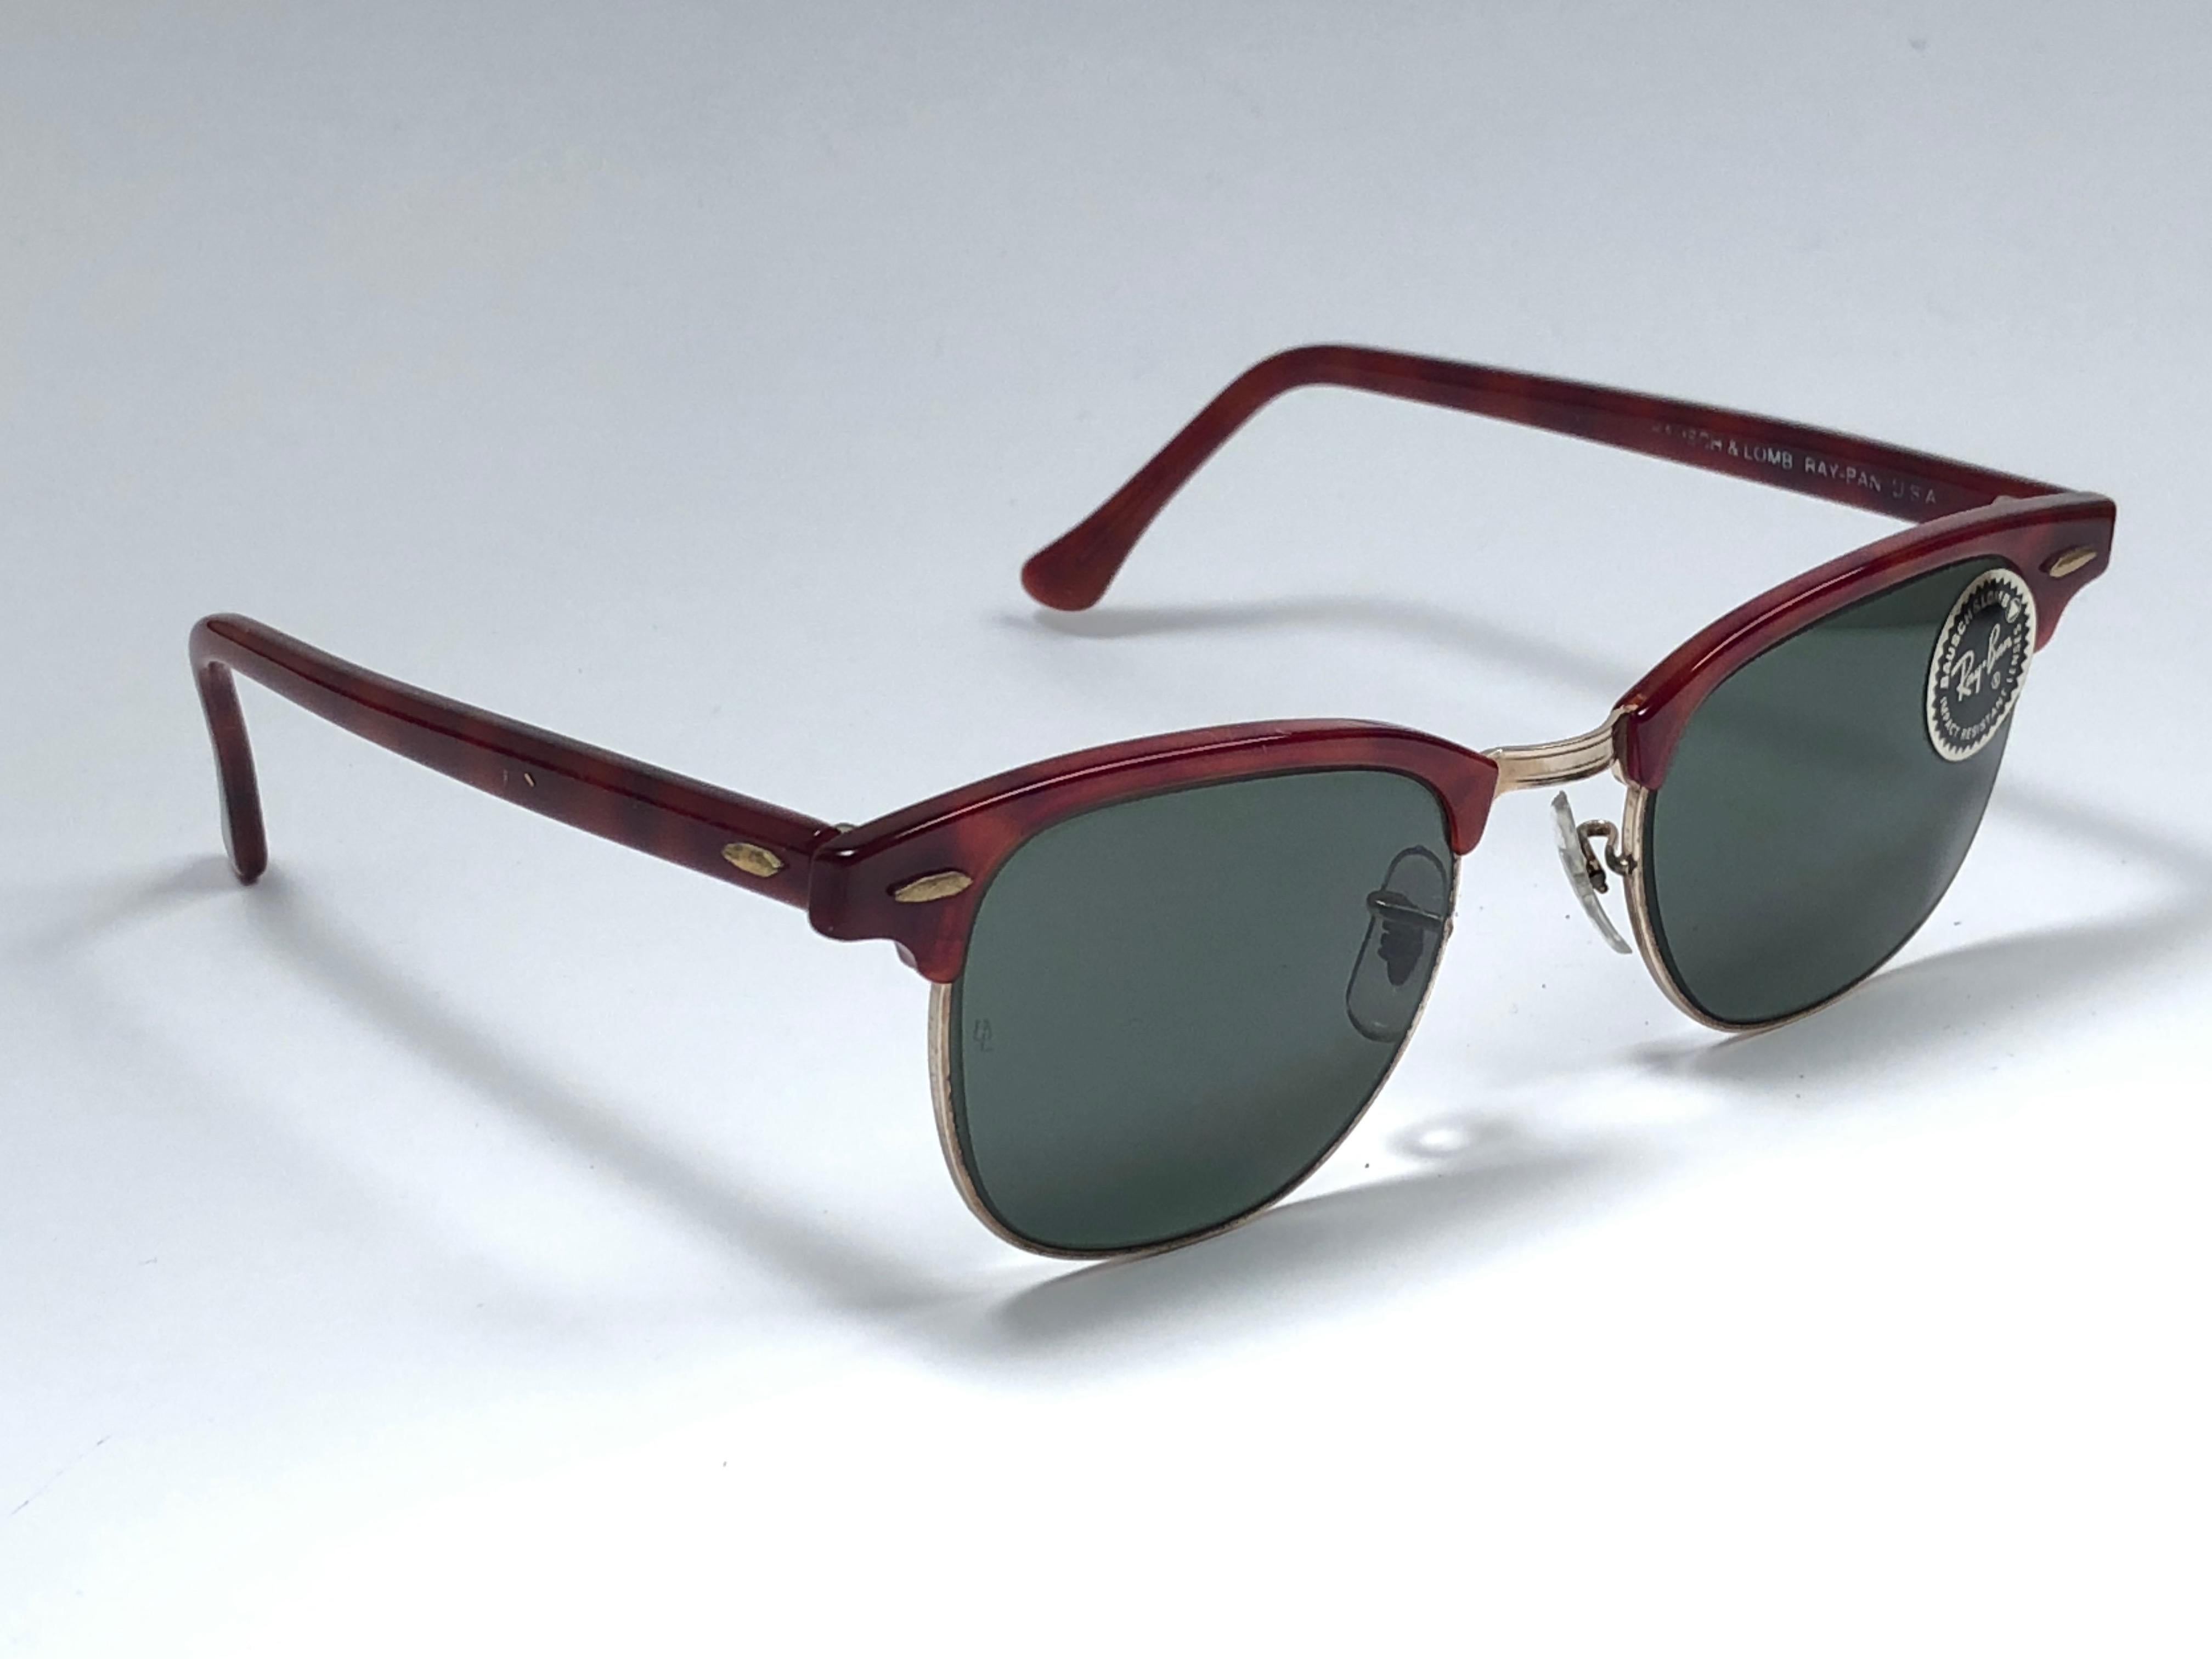 New classic Clubmaster in deep red and gold. B&L etched in both g15 grey lenses. Please notice that this item is nearly 40 years old and could show some storage wear.  
New, ever worn or displayed.